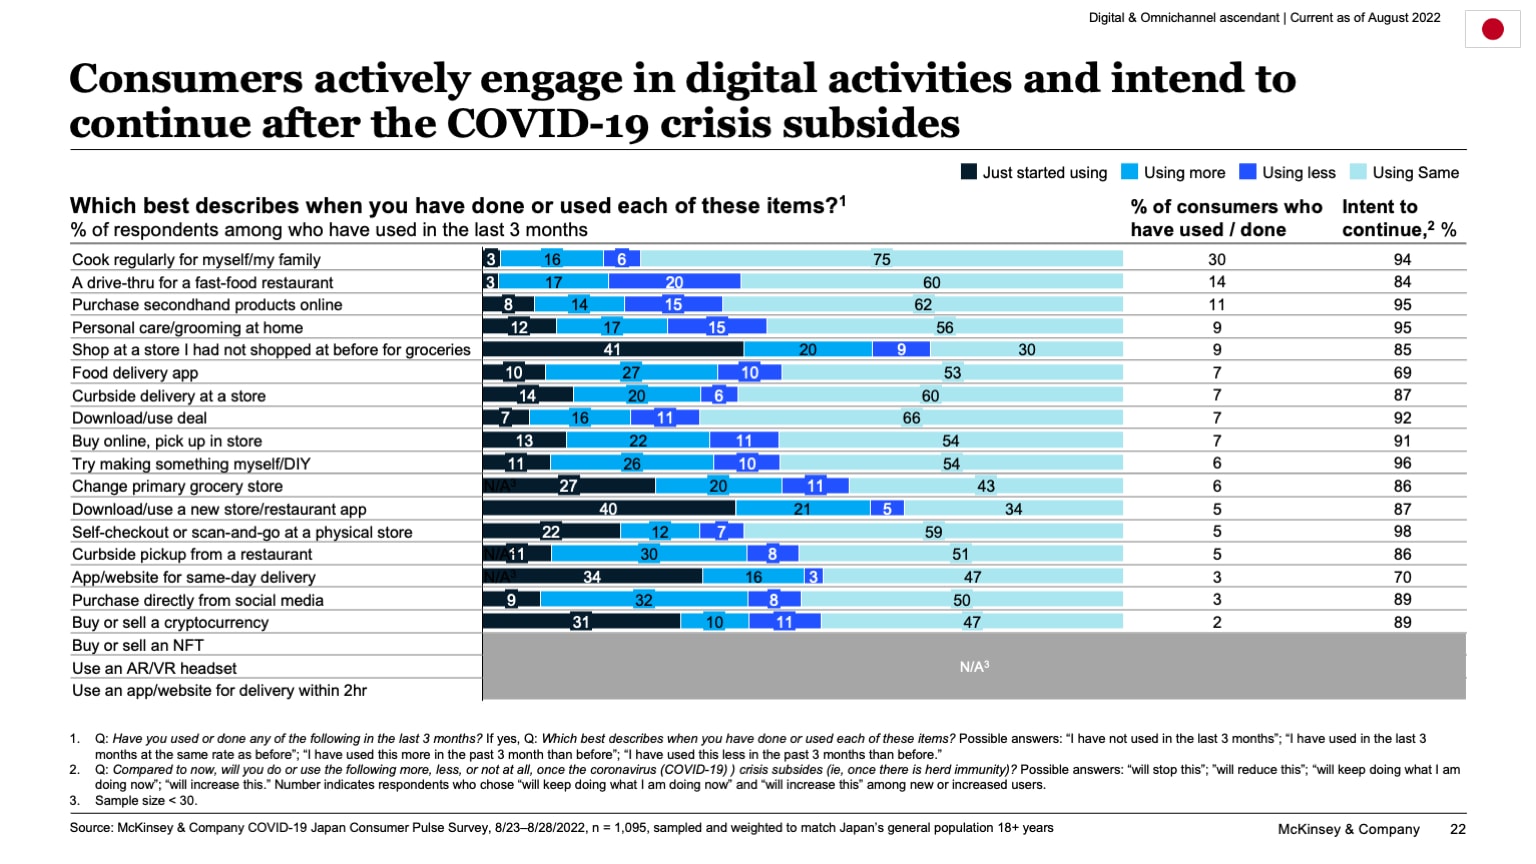 Consumers actively engage in digital activities and intend to continue after the COVID-19 crisis subsides